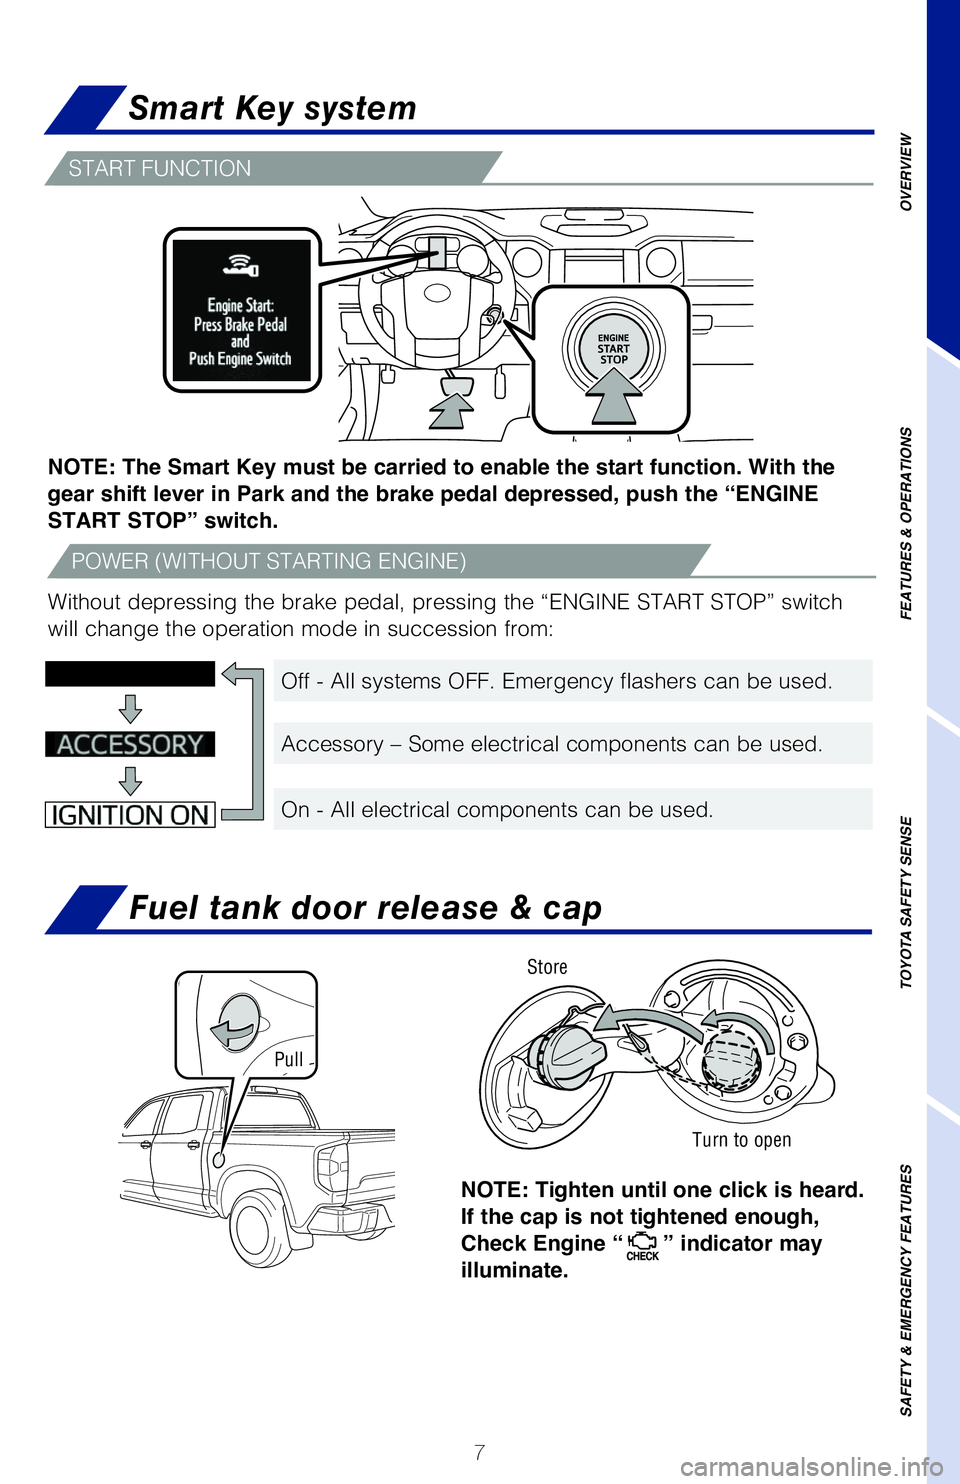 TOYOTA TUNDRA 2020  Owners Manual (in English) 7
OVERVIEW
FEATURES & OPERATIONS
TOYOTA SAFETY SENSE
SAFETY & EMERGENCY FEATURES
Fuel tank door release & cap
NOTE: Tighten until one click is heard. 
If the cap is not tightened enough,  
Check Engin